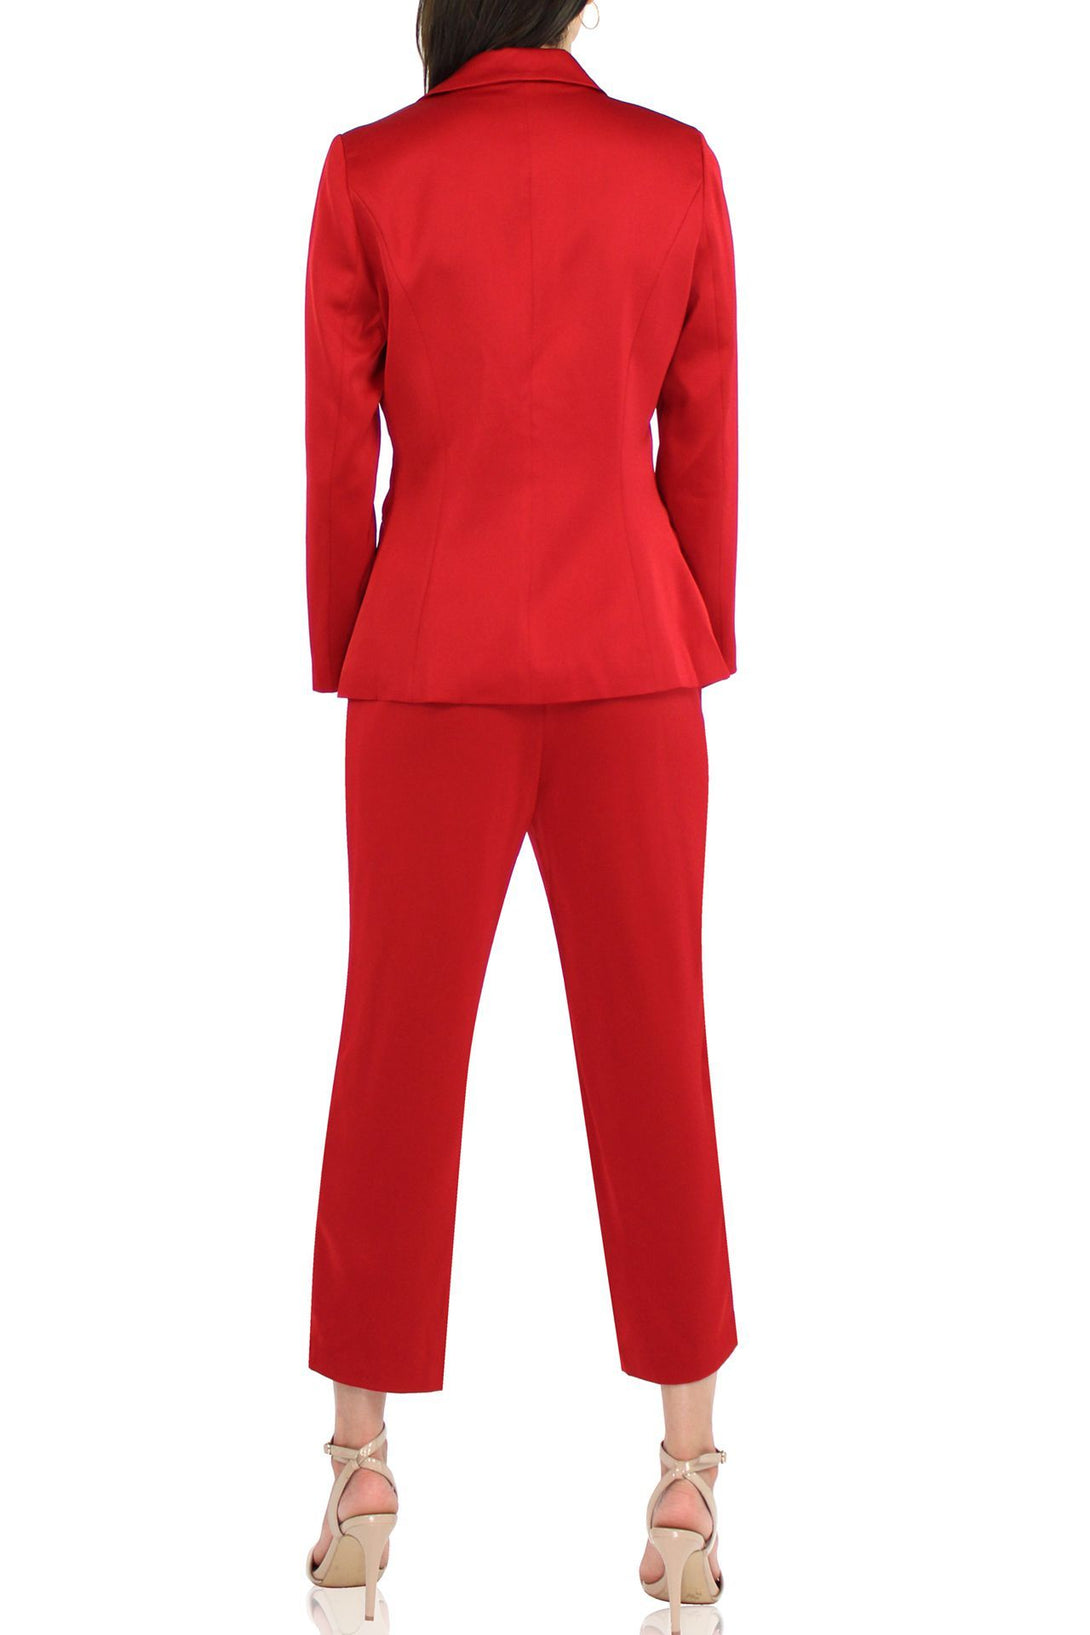 Women-Designer-Belted-Matching-Suit-Set-In-Red-by-Kyle-Richards